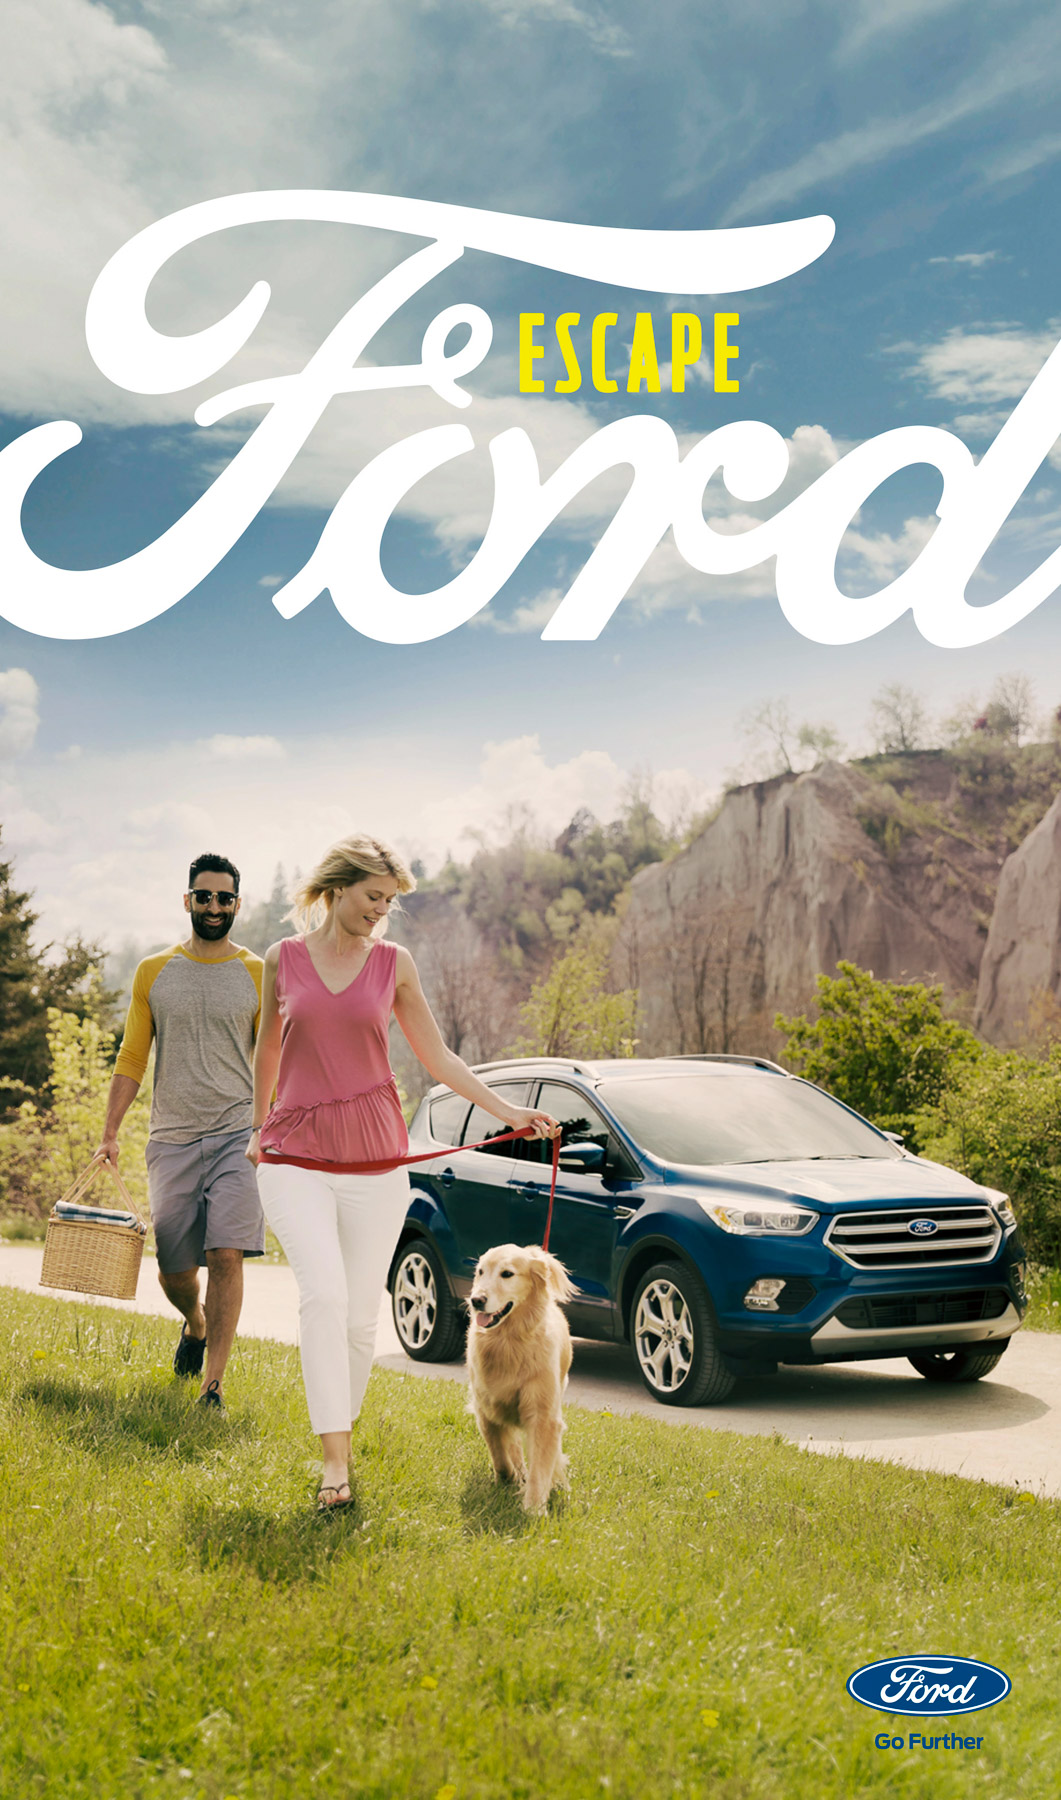 Advertising campaign for the Ford Escape with GTB